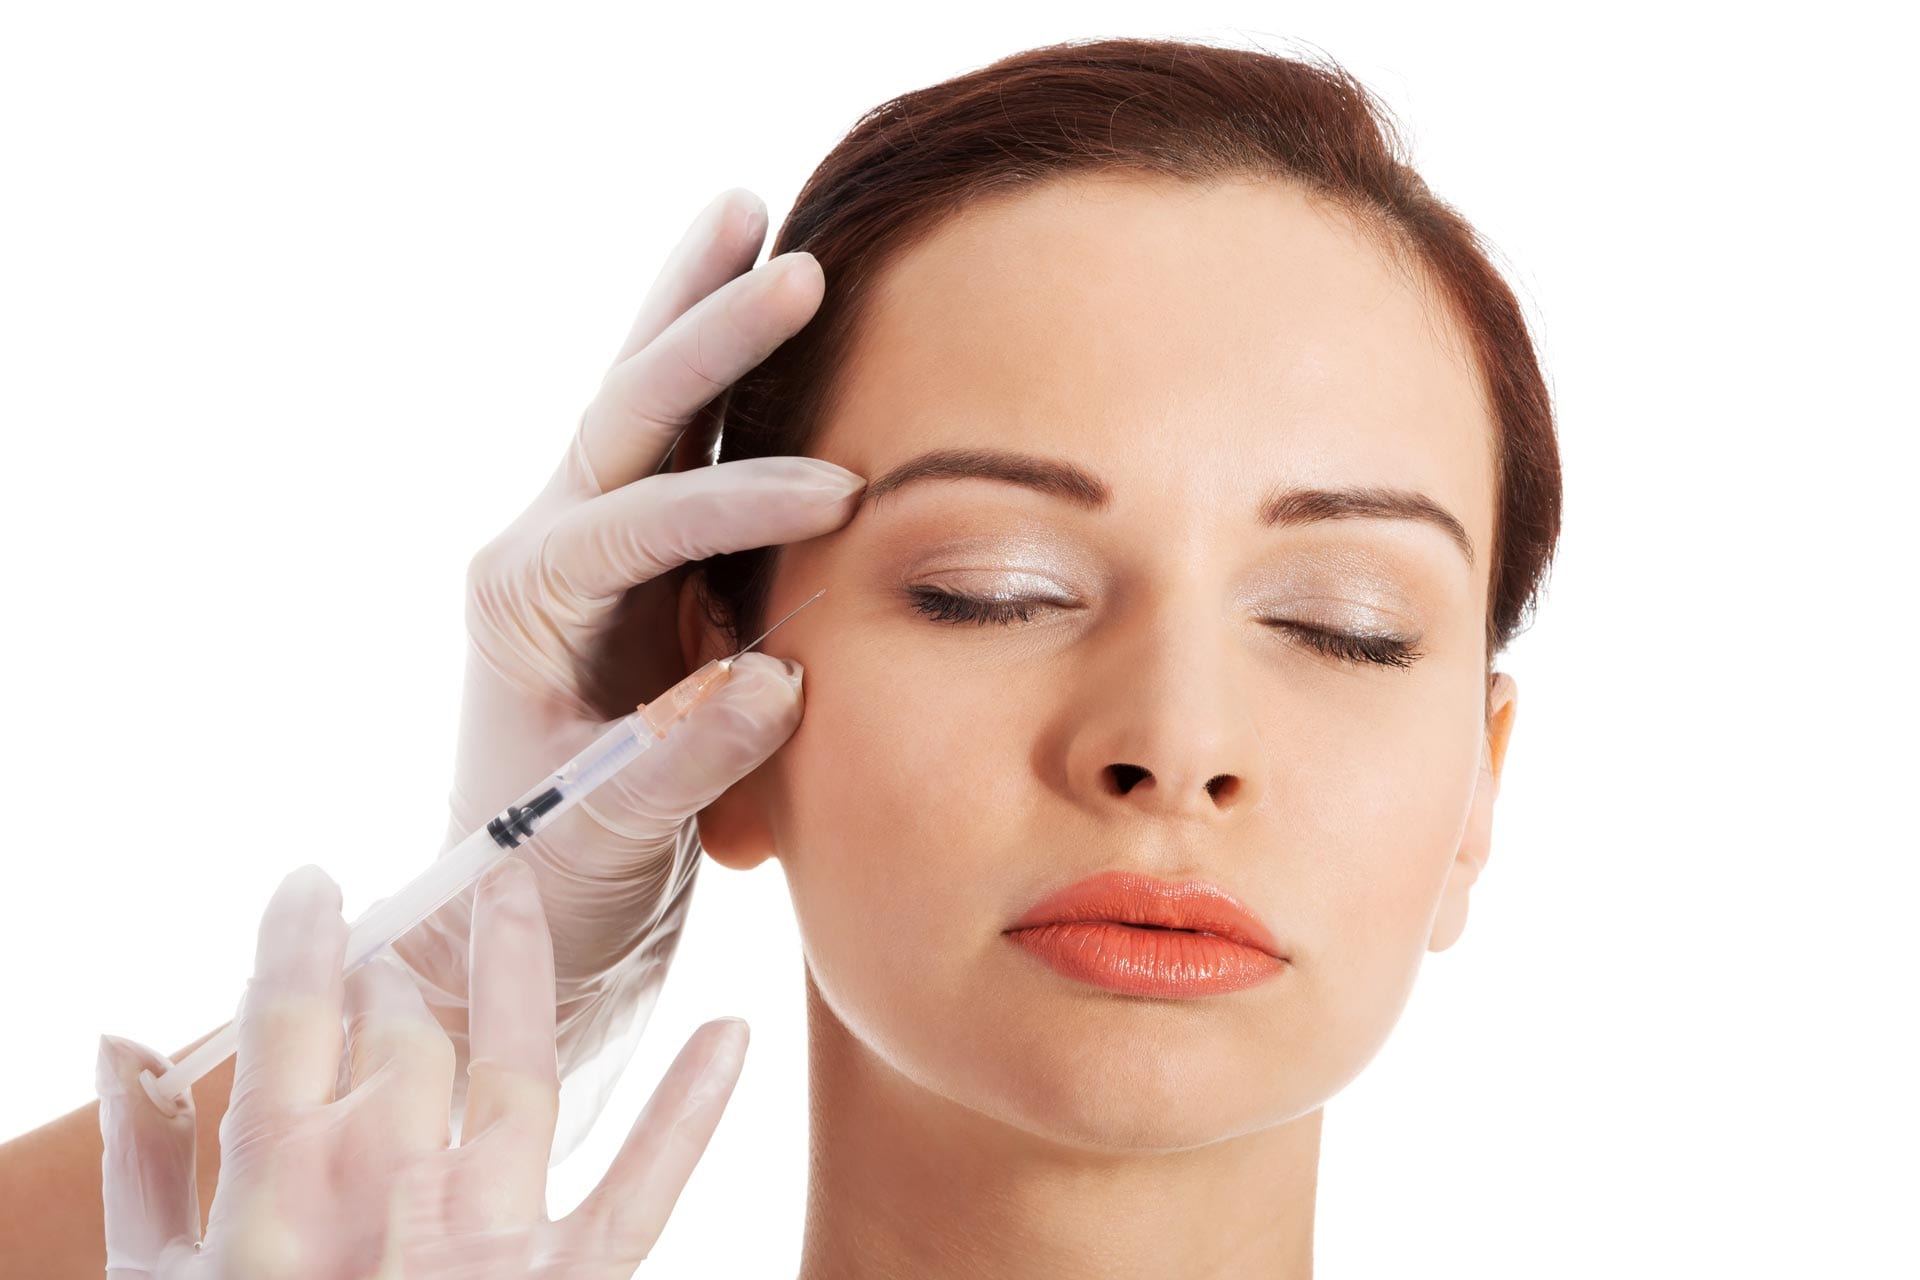 Cropped Image Injection Botox Injection To Women